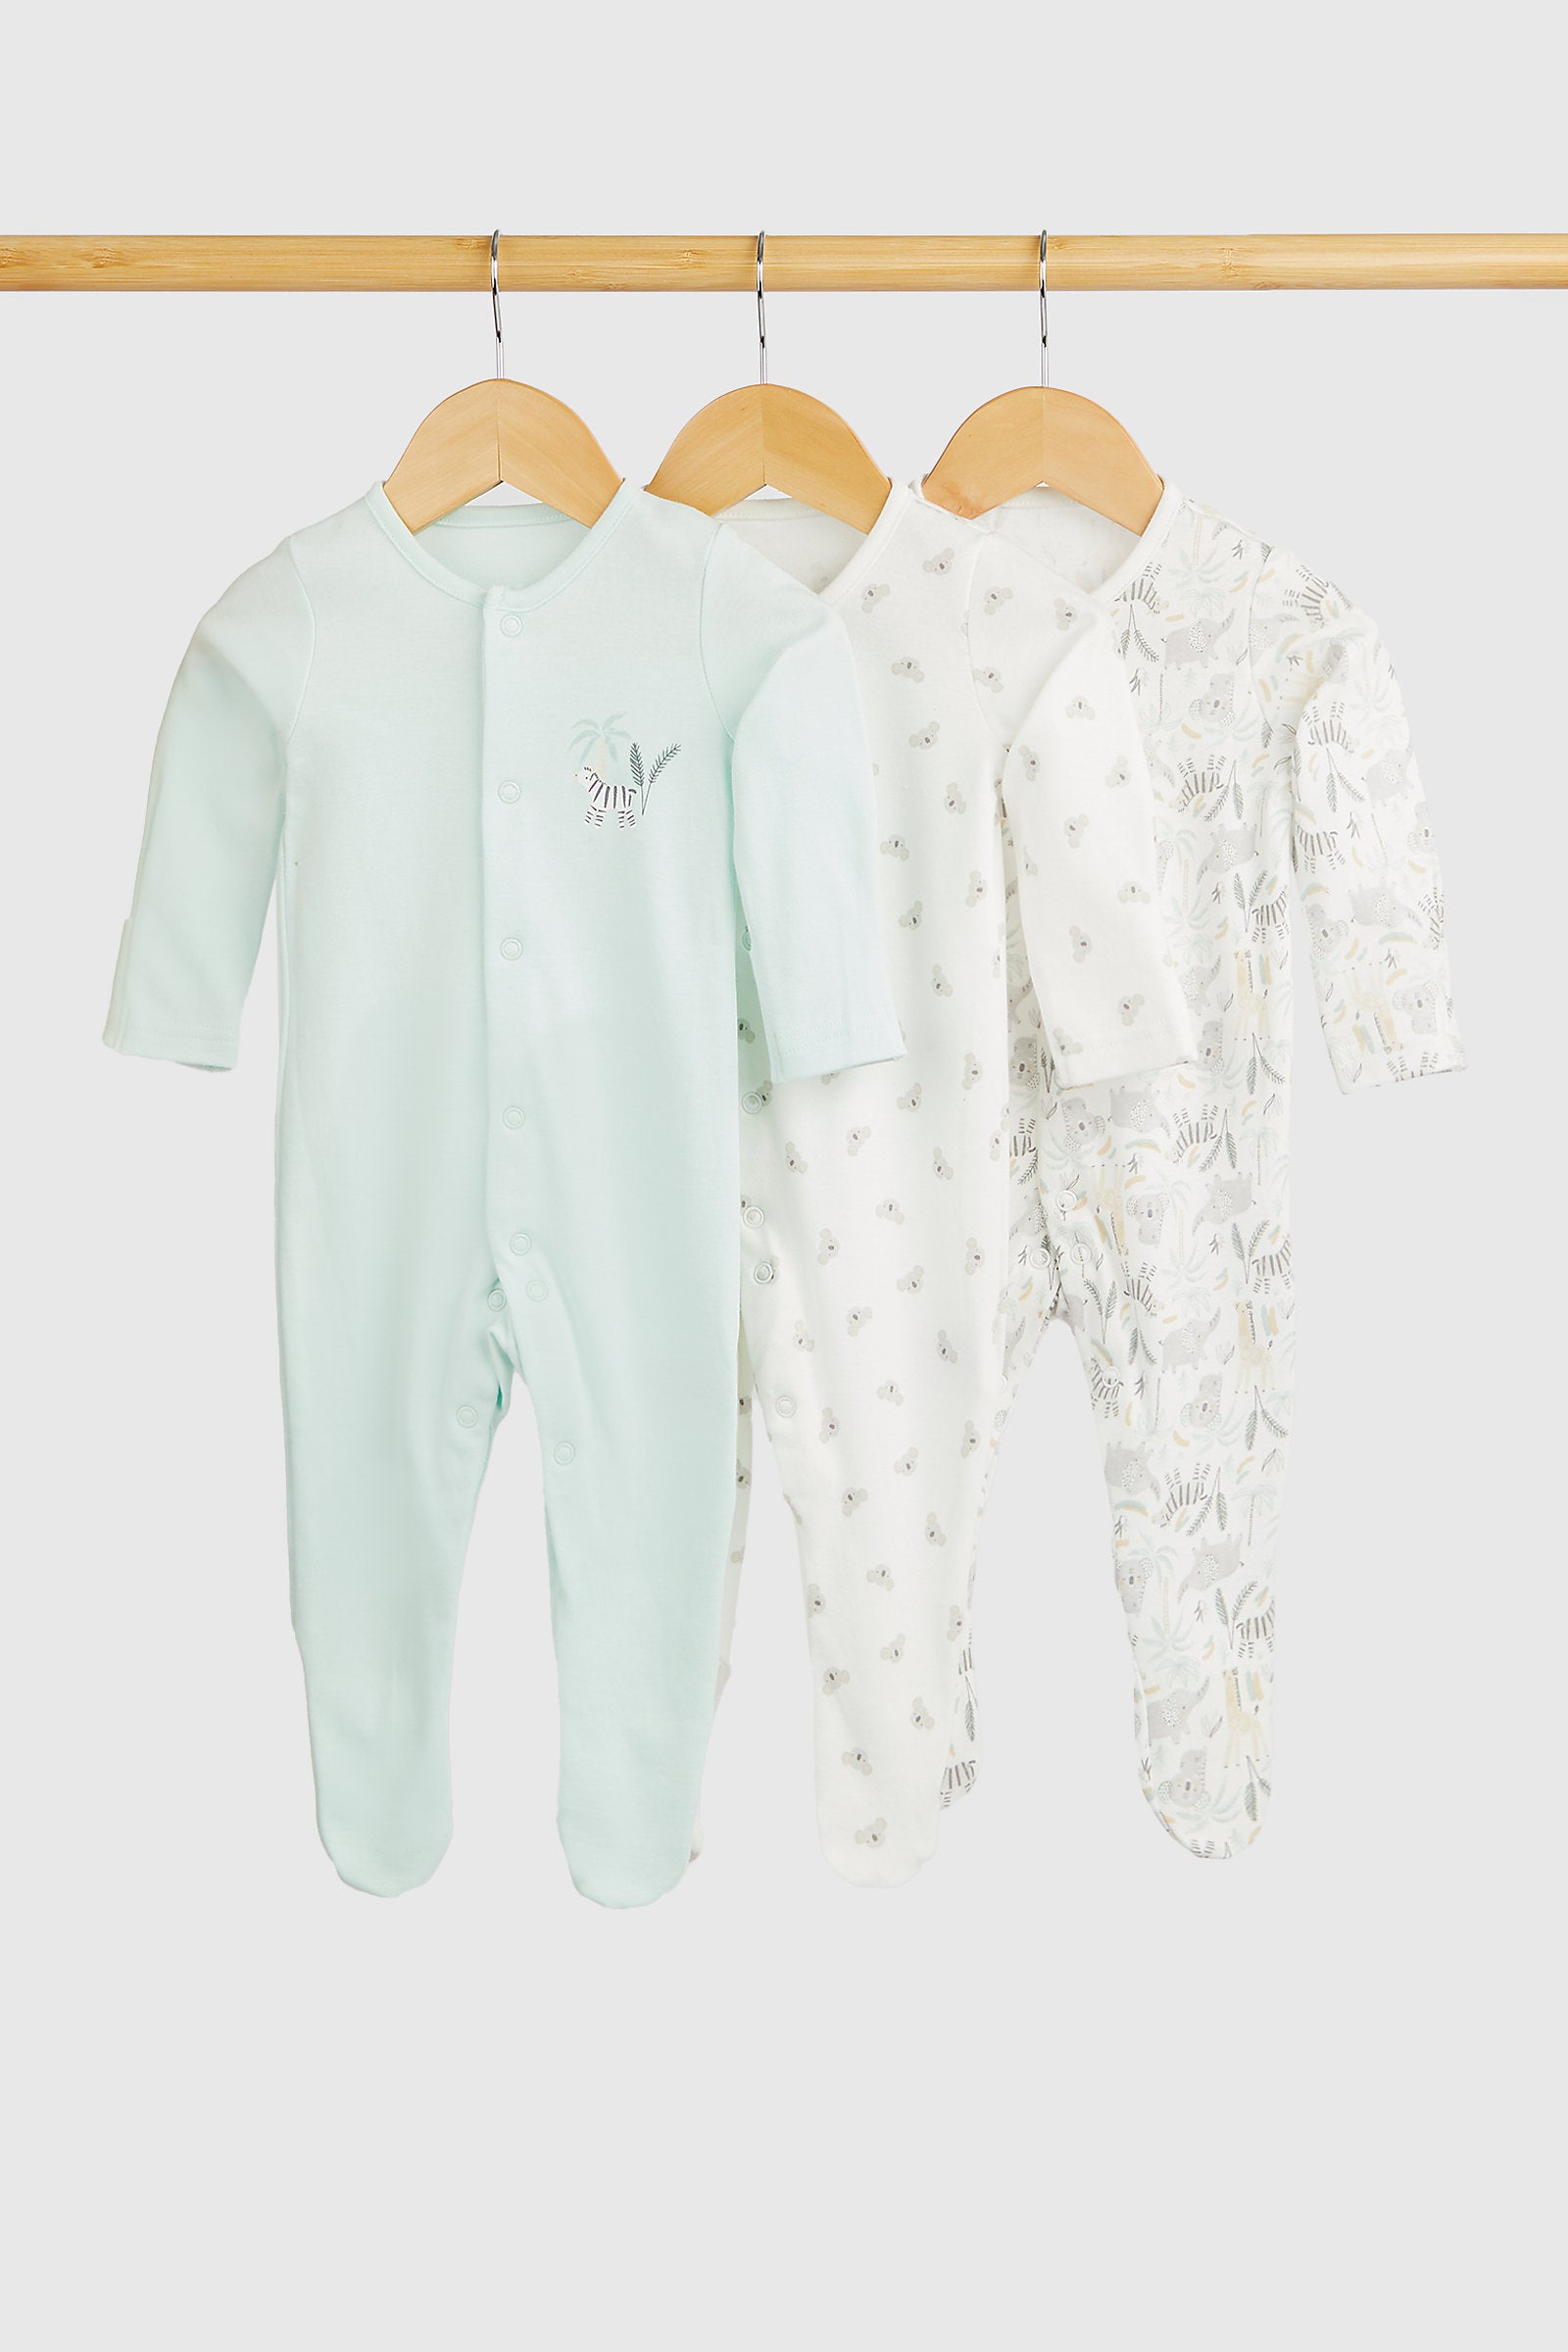 Mothercare Safari Baby Sleepsuits - 3 Pack